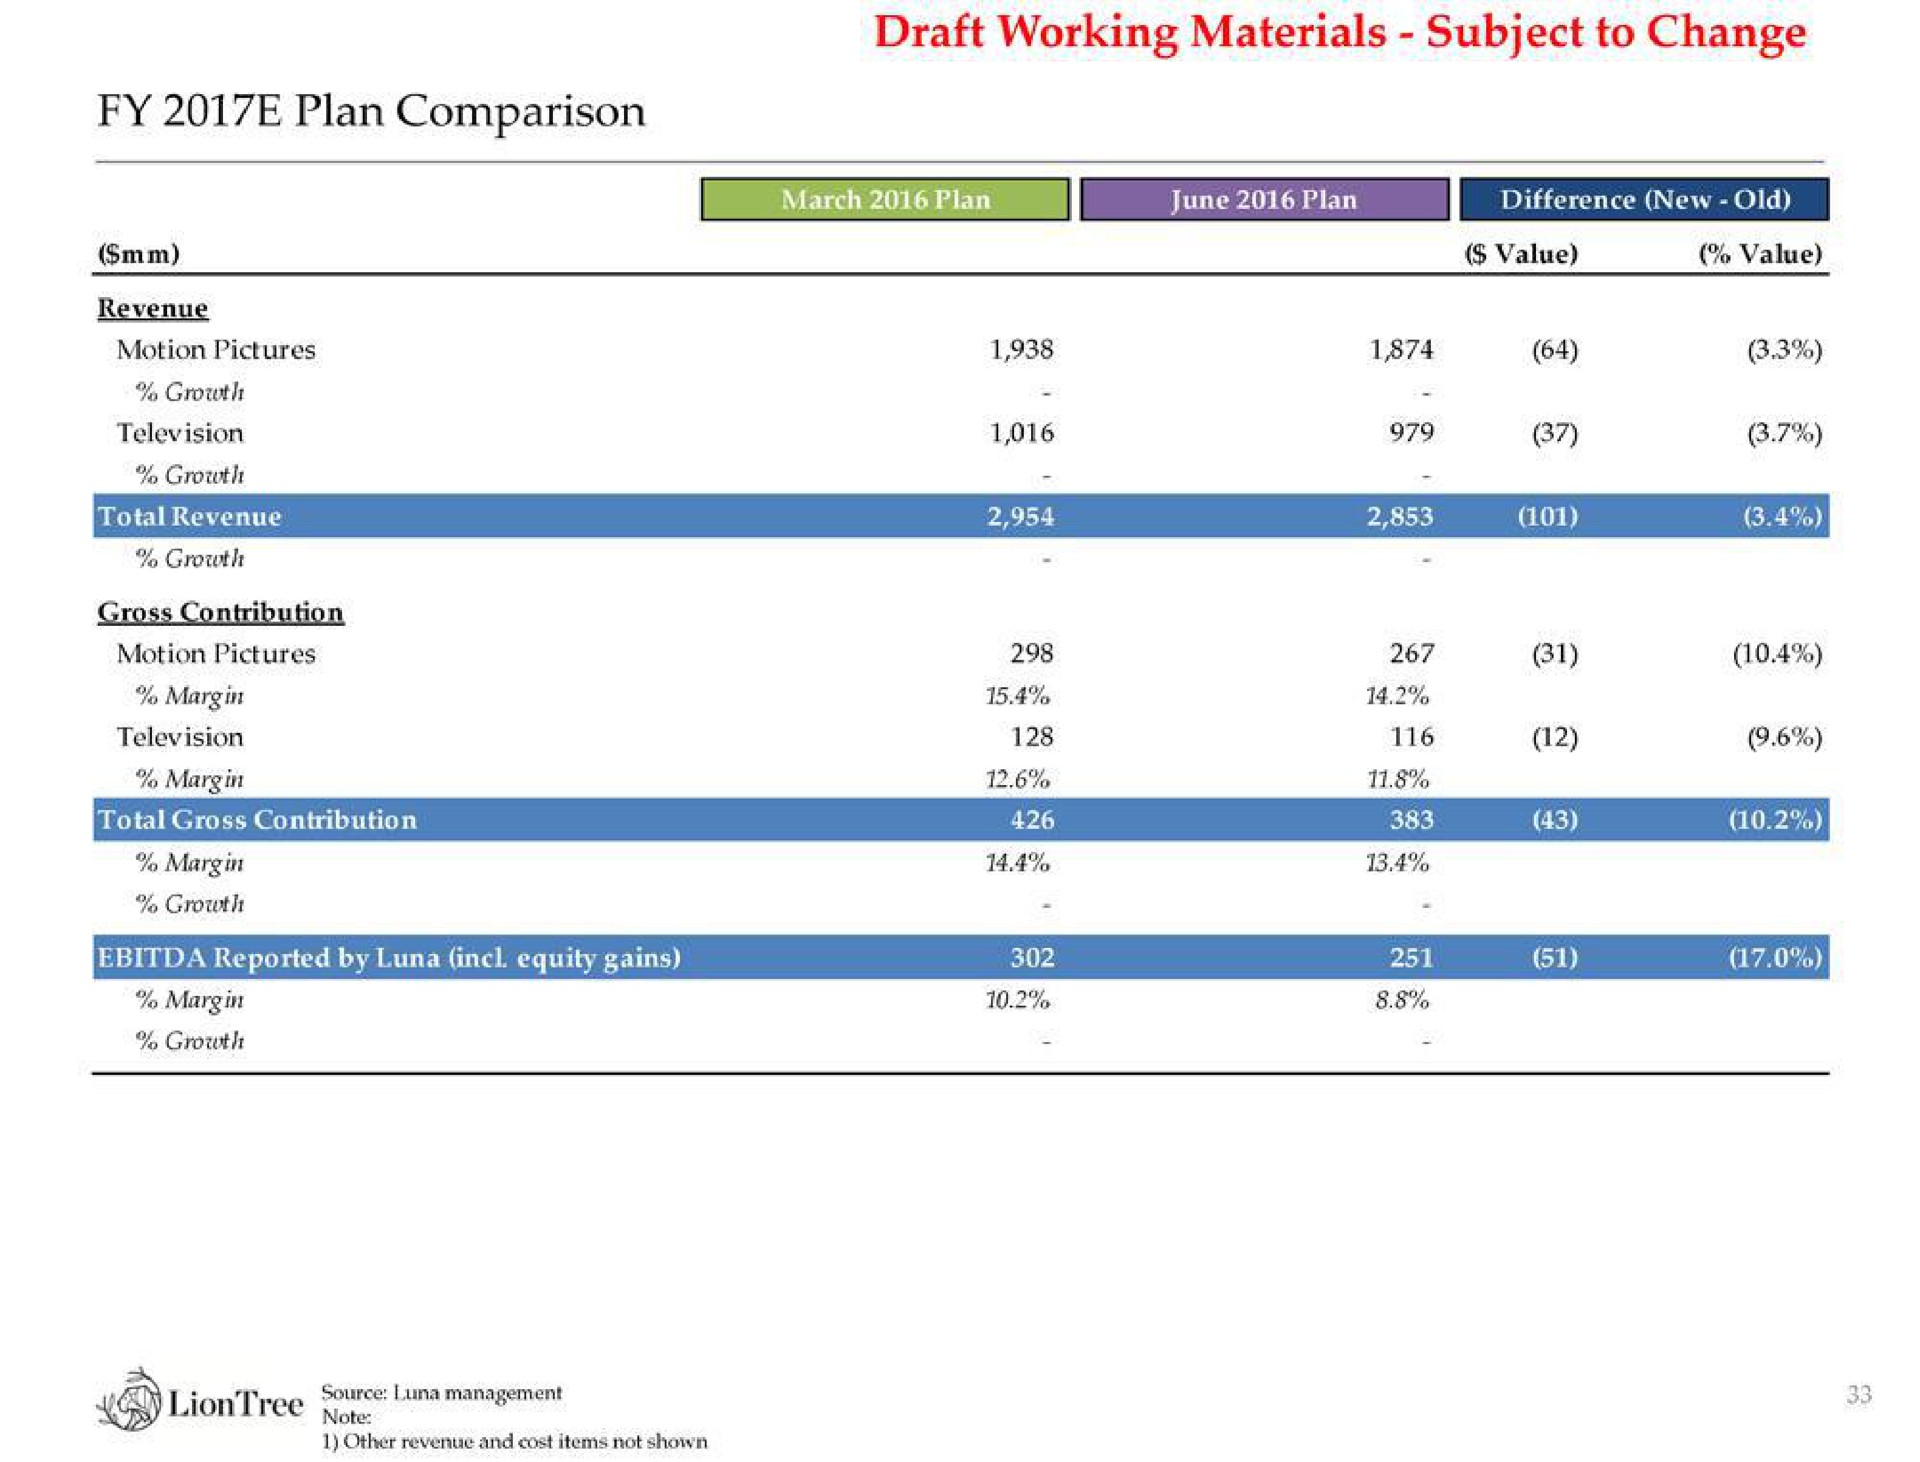 plan comparison draft working materials subject to change | LionTree